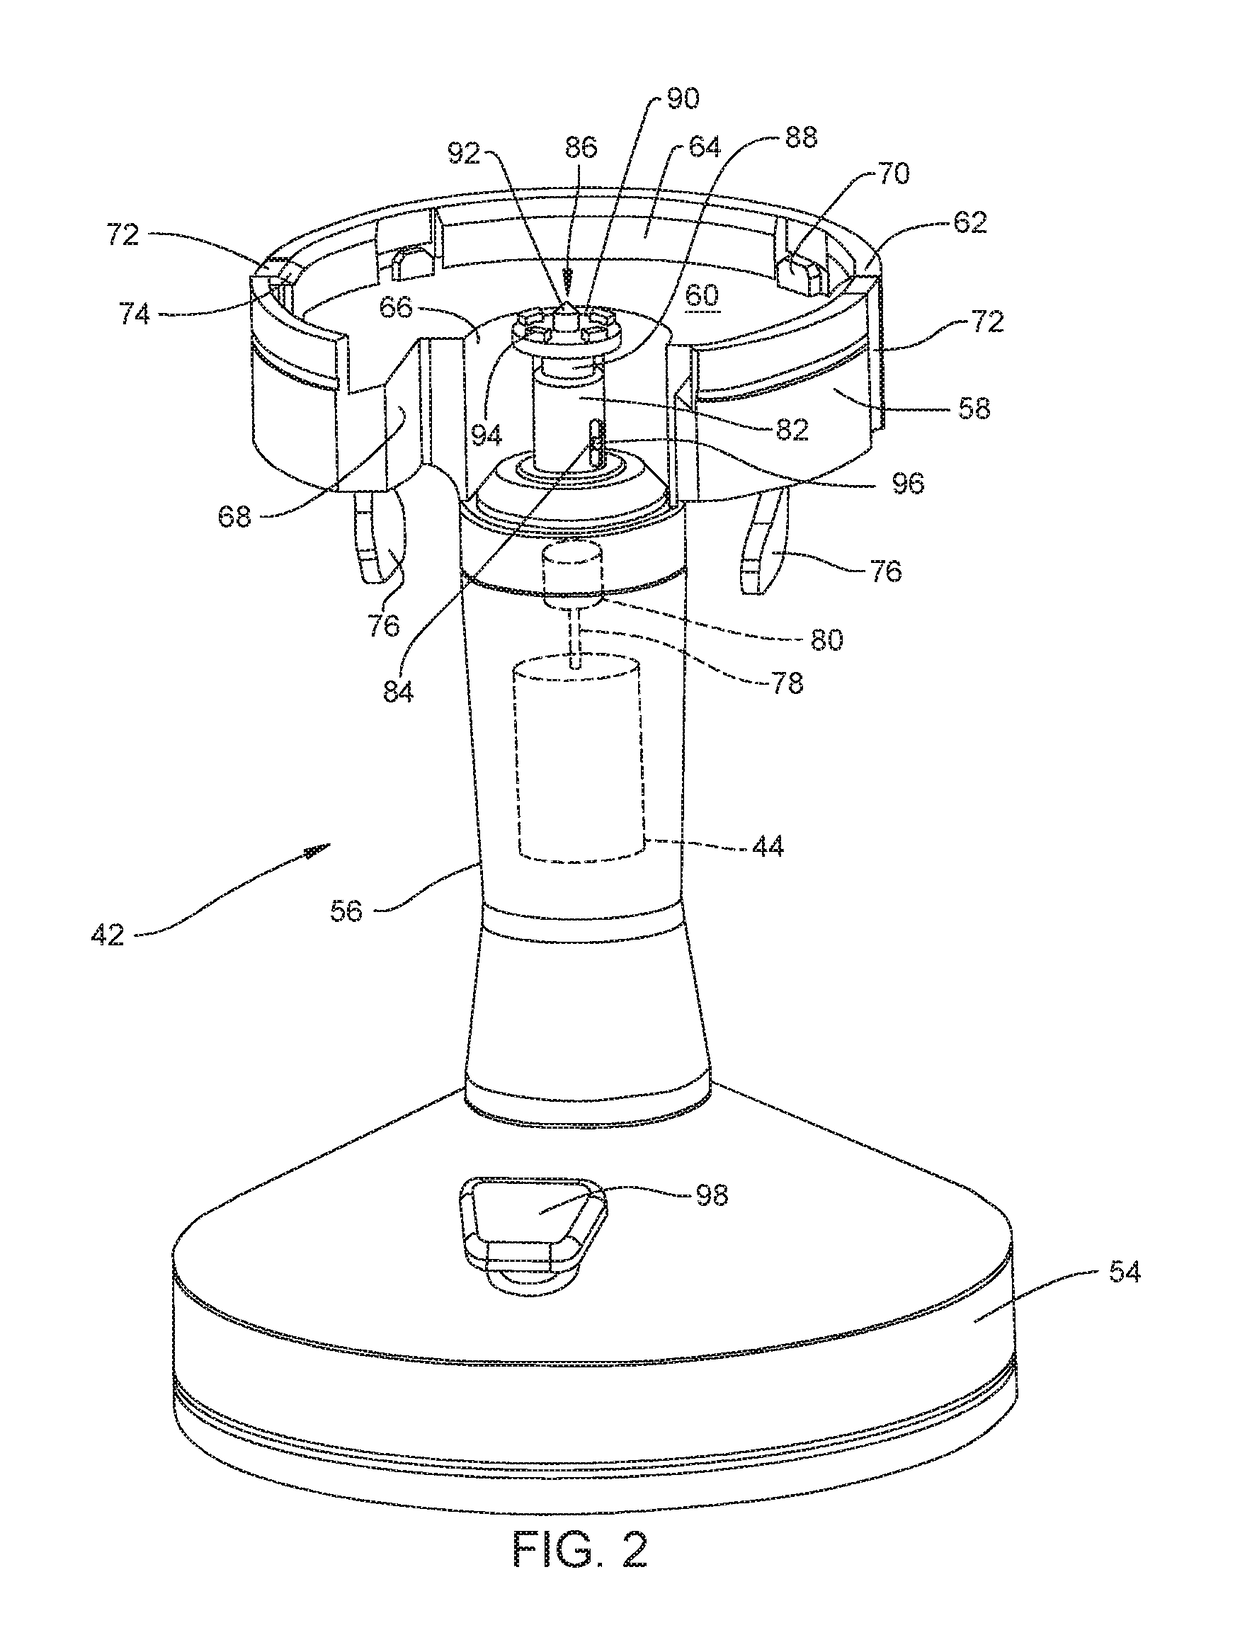 Bone cleaning assembly with a rotating cutter that is disposed in a rotating shaving tube that rotates independently of the rotating cutter